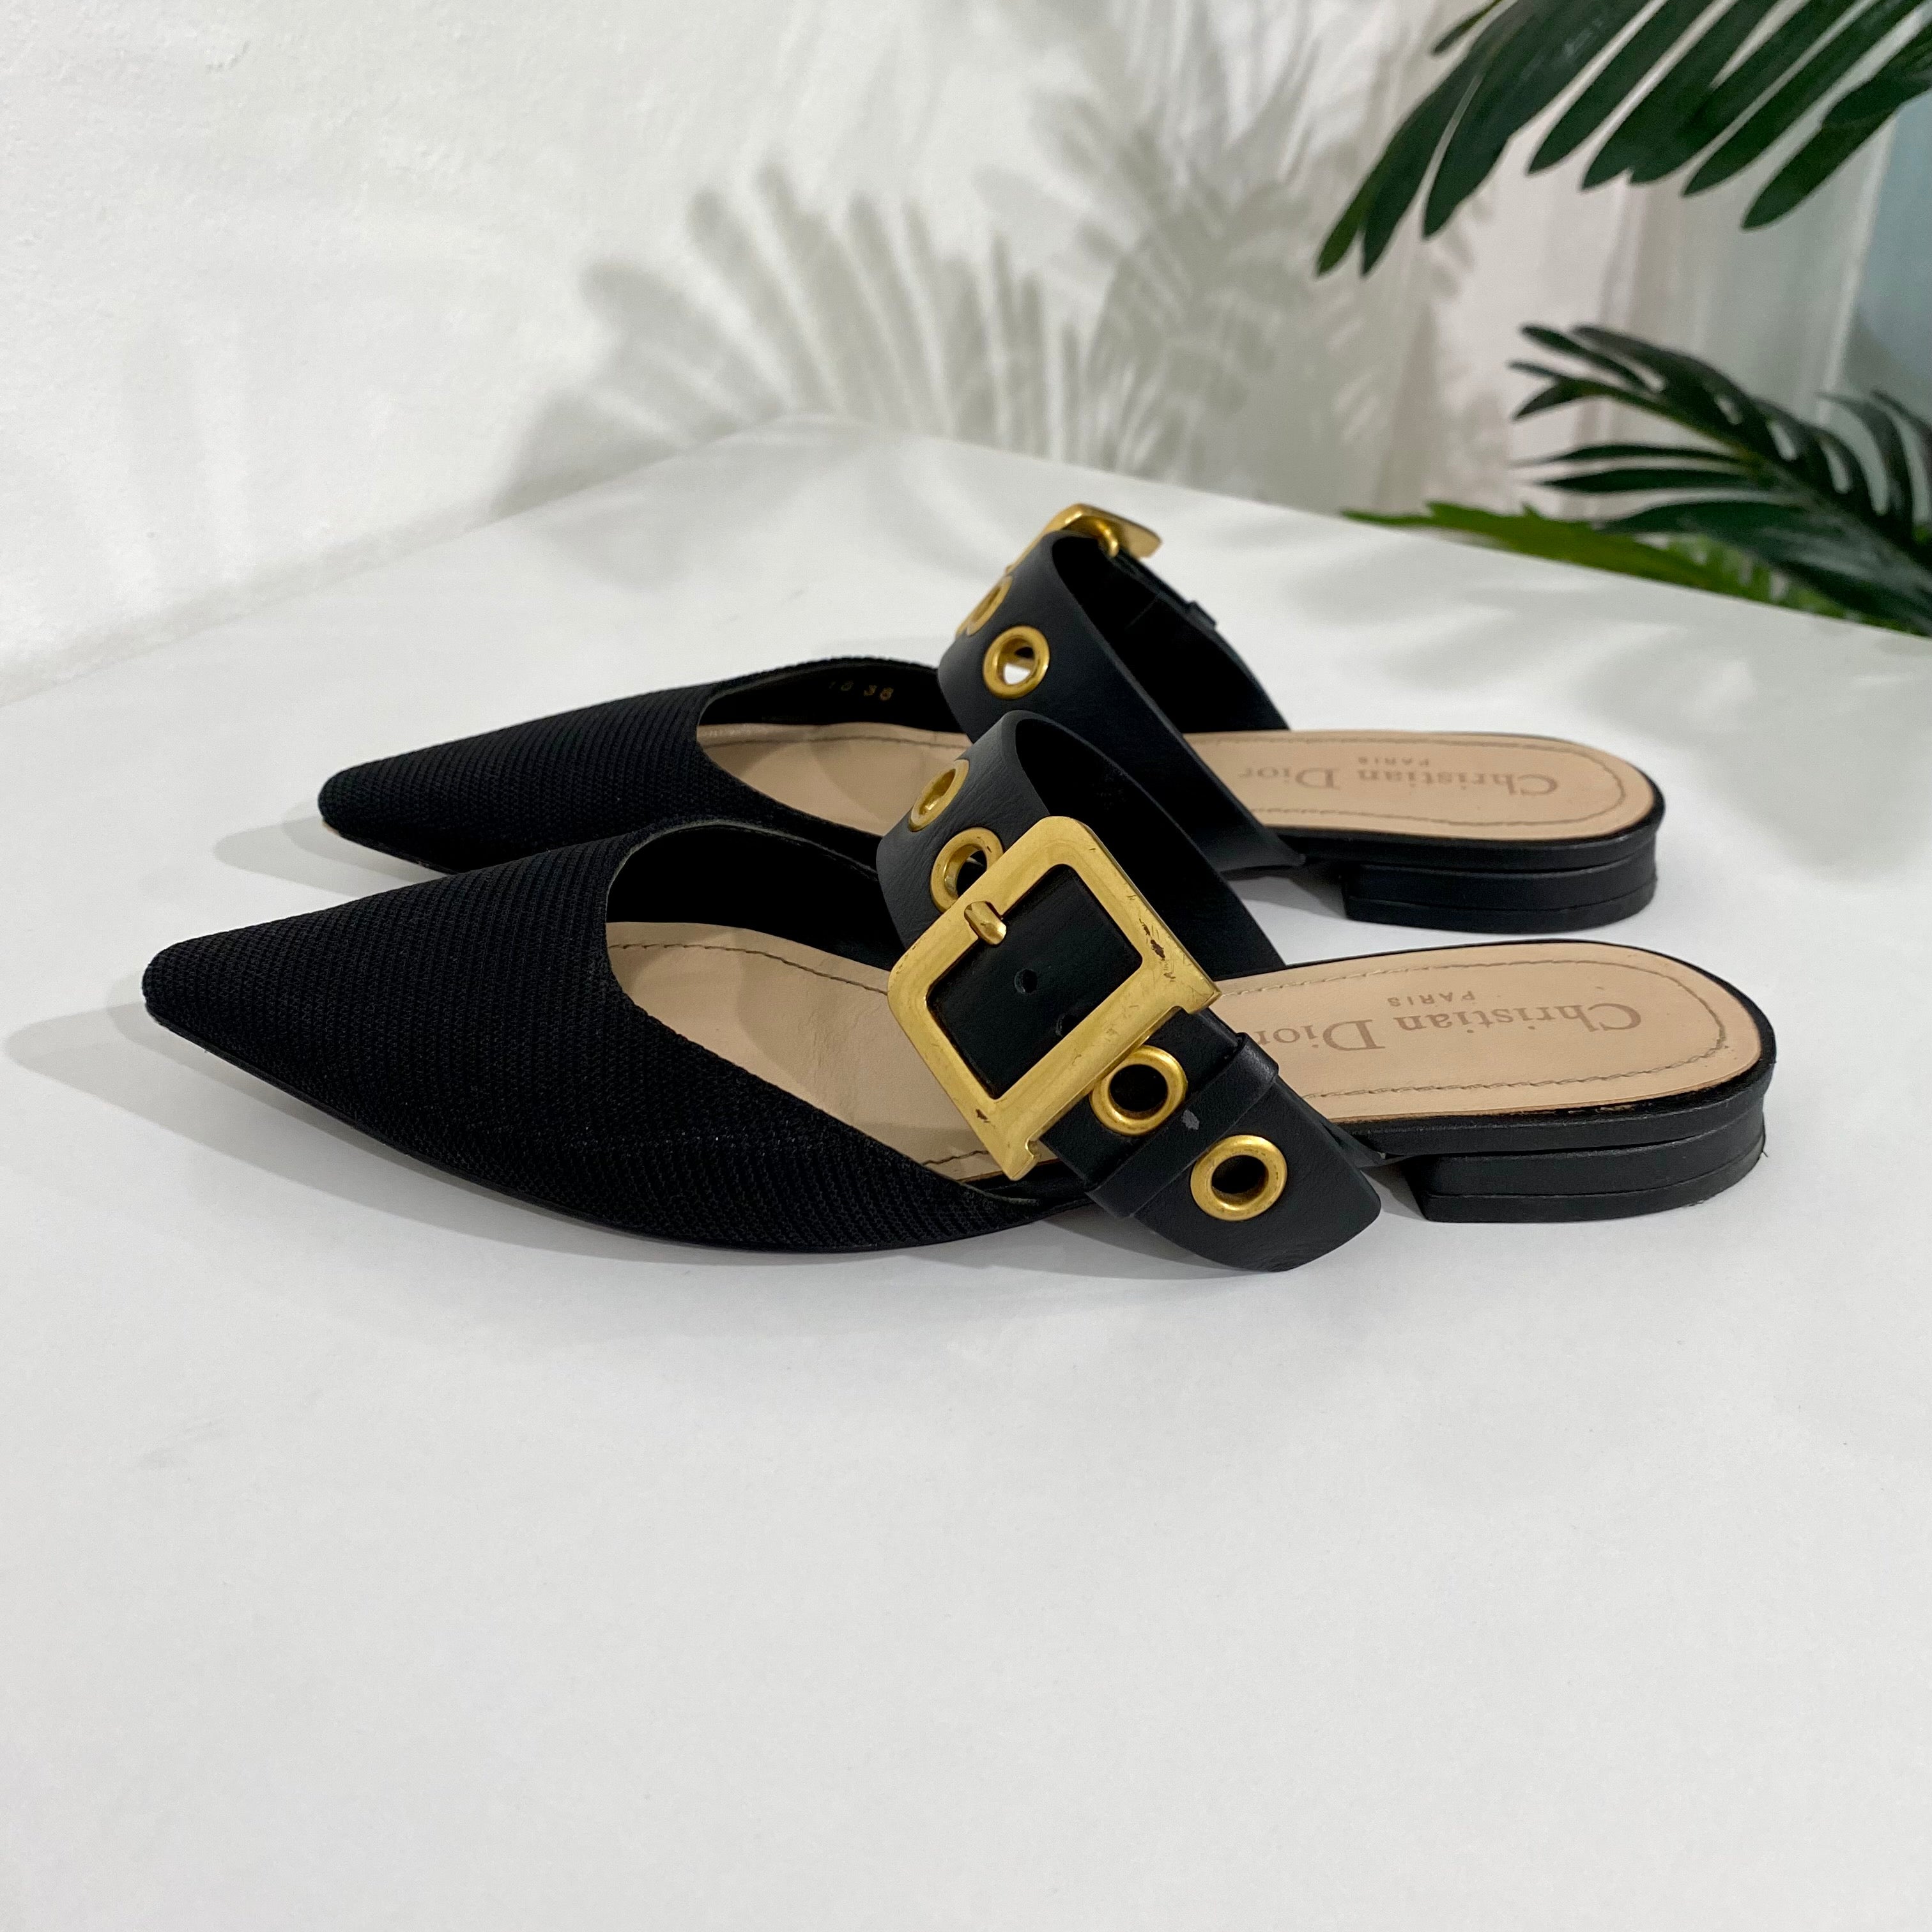 Christian Dior Open Toe Flats Size 40 It (10 Us) – KMK Luxury Consignment